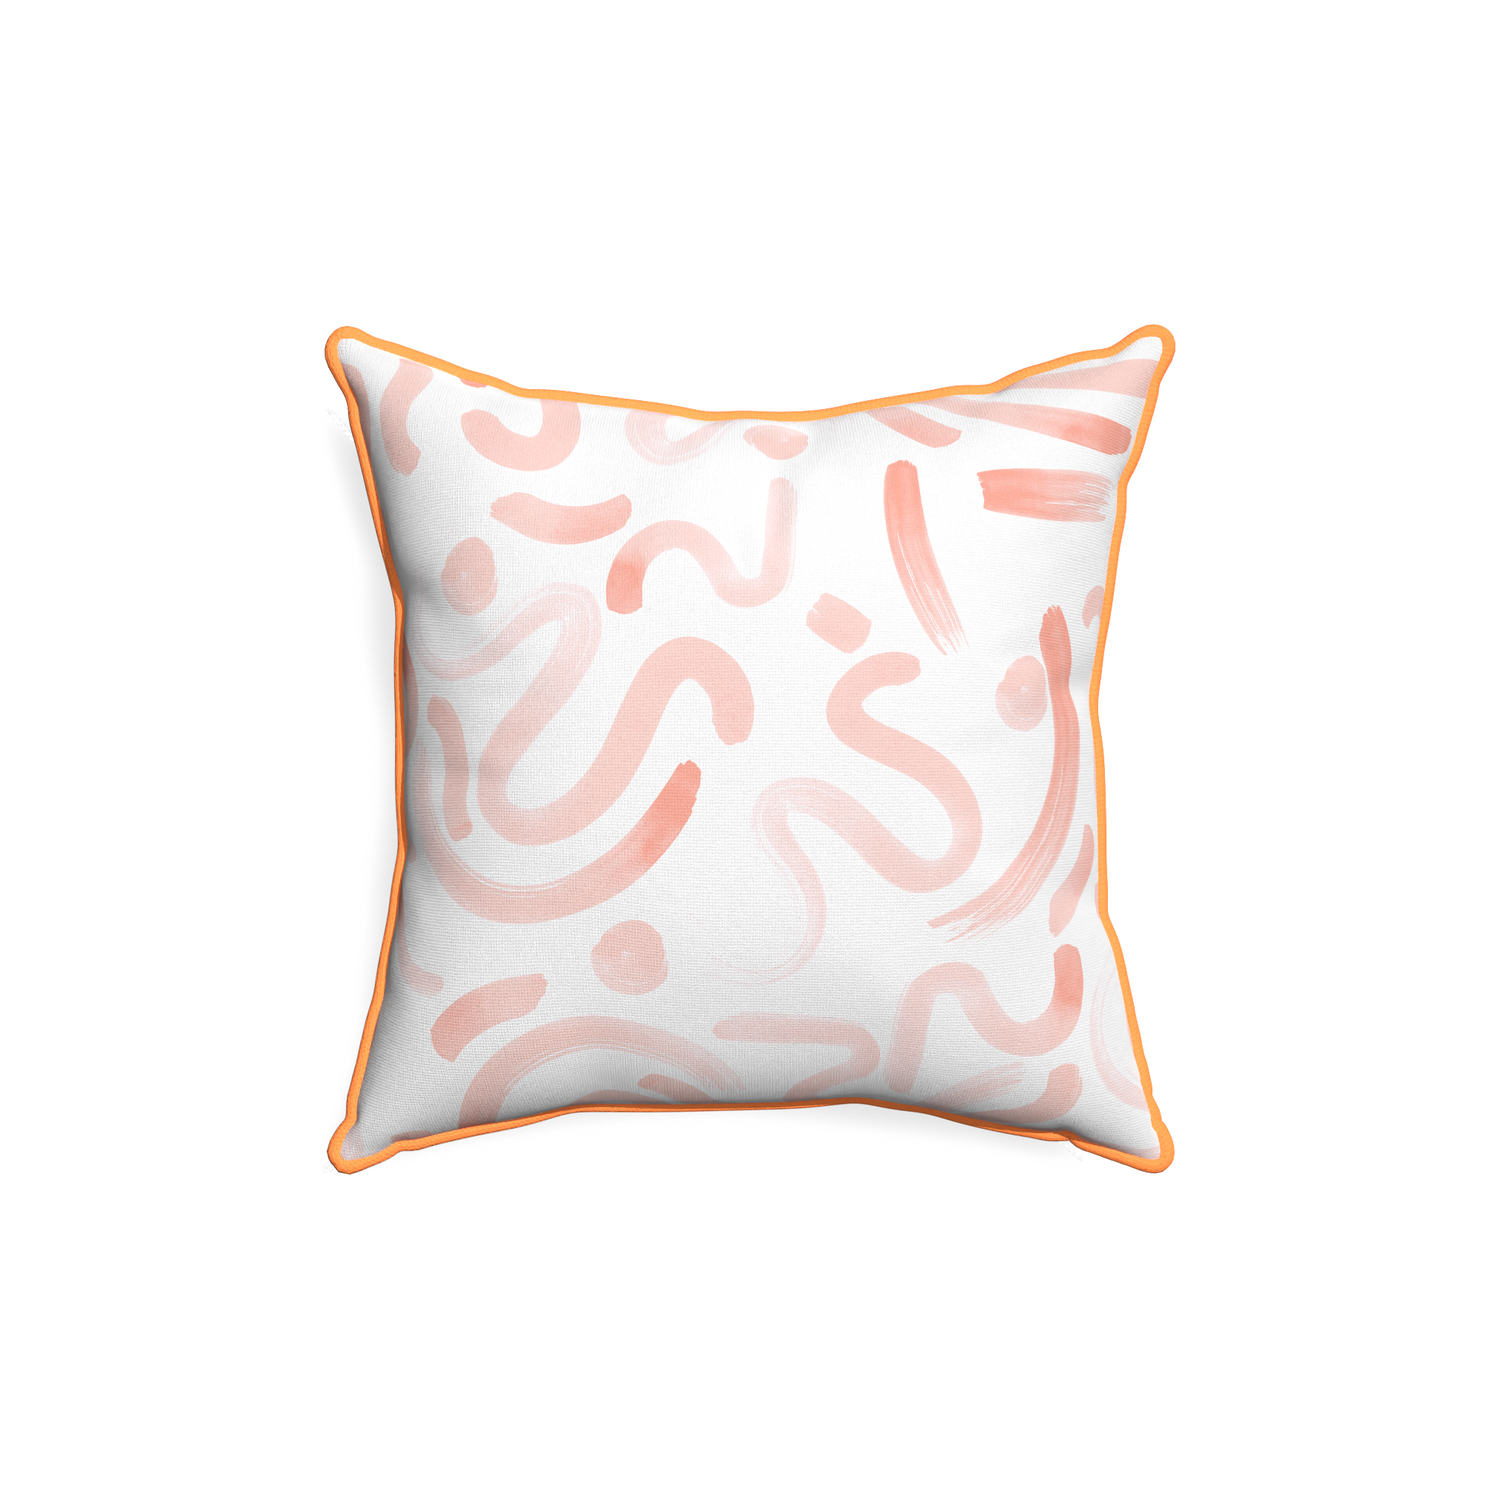 18-square hockney pink custom pink graphicpillow with clementine piping on white background